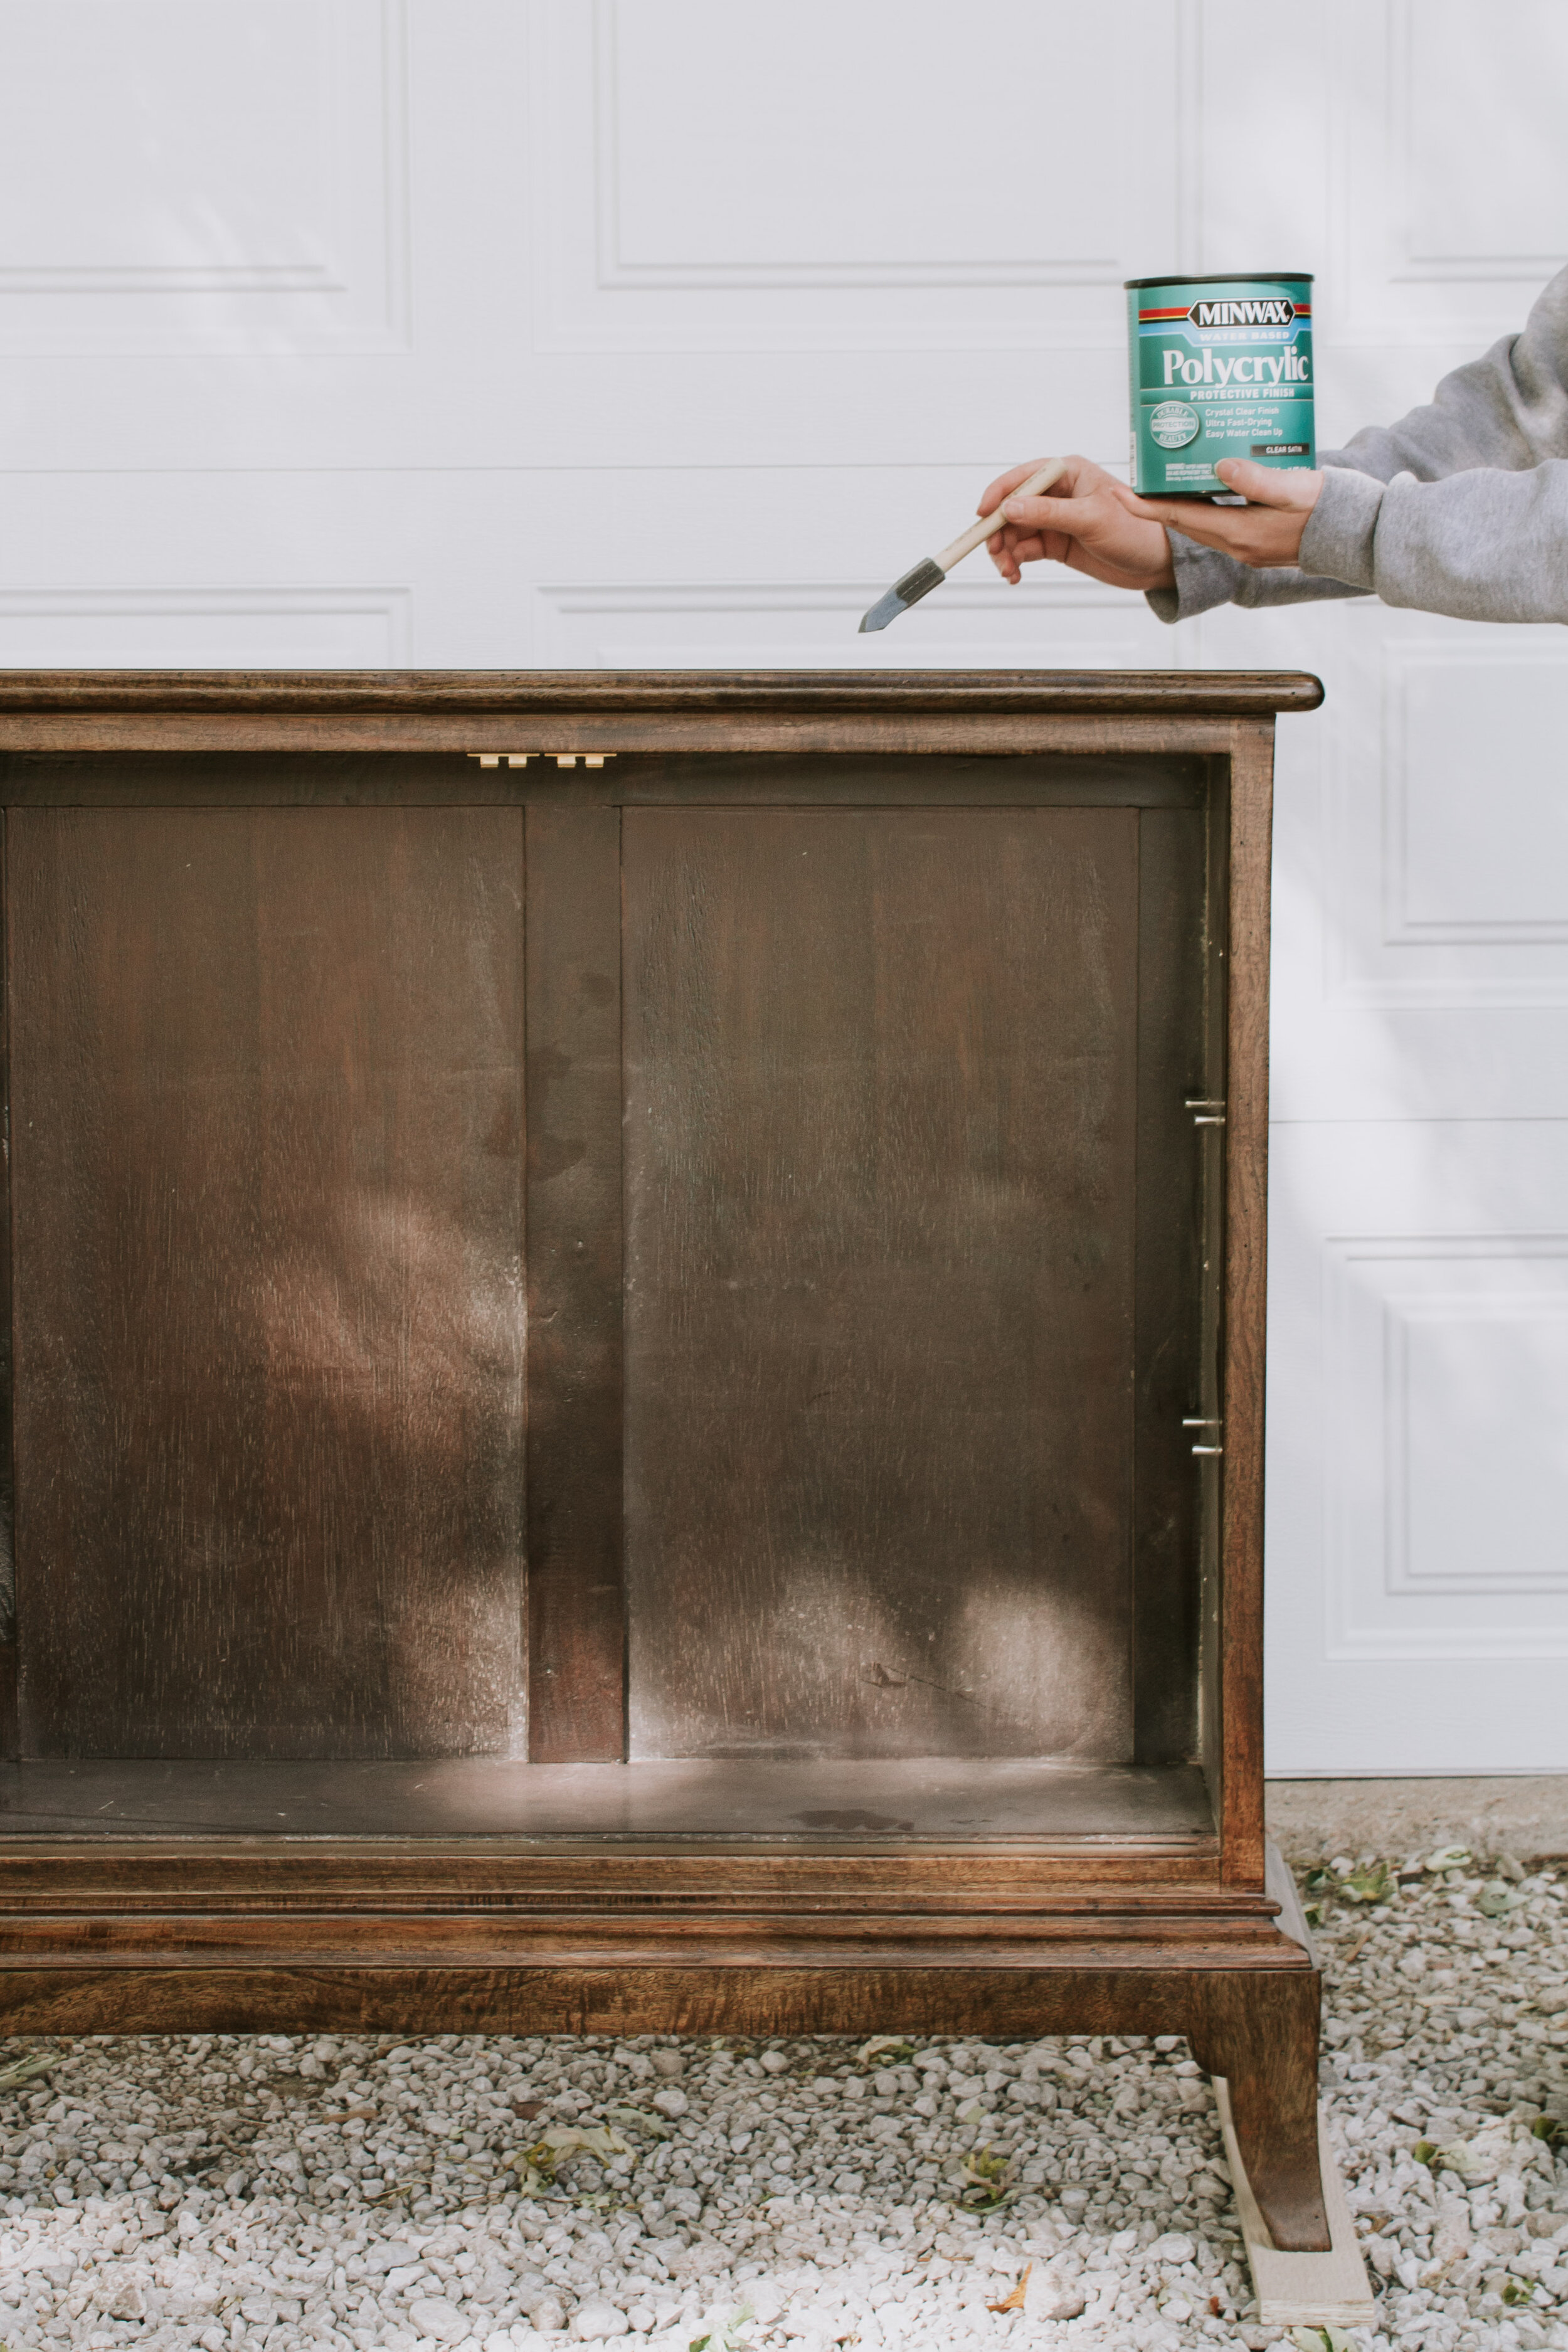 My Complete Guide to Staining and Refinishing Furniture. How to sand, stain, and protect weathered furniture. How to refurbish old furniture. Staining tutorial by Nadine Stay.